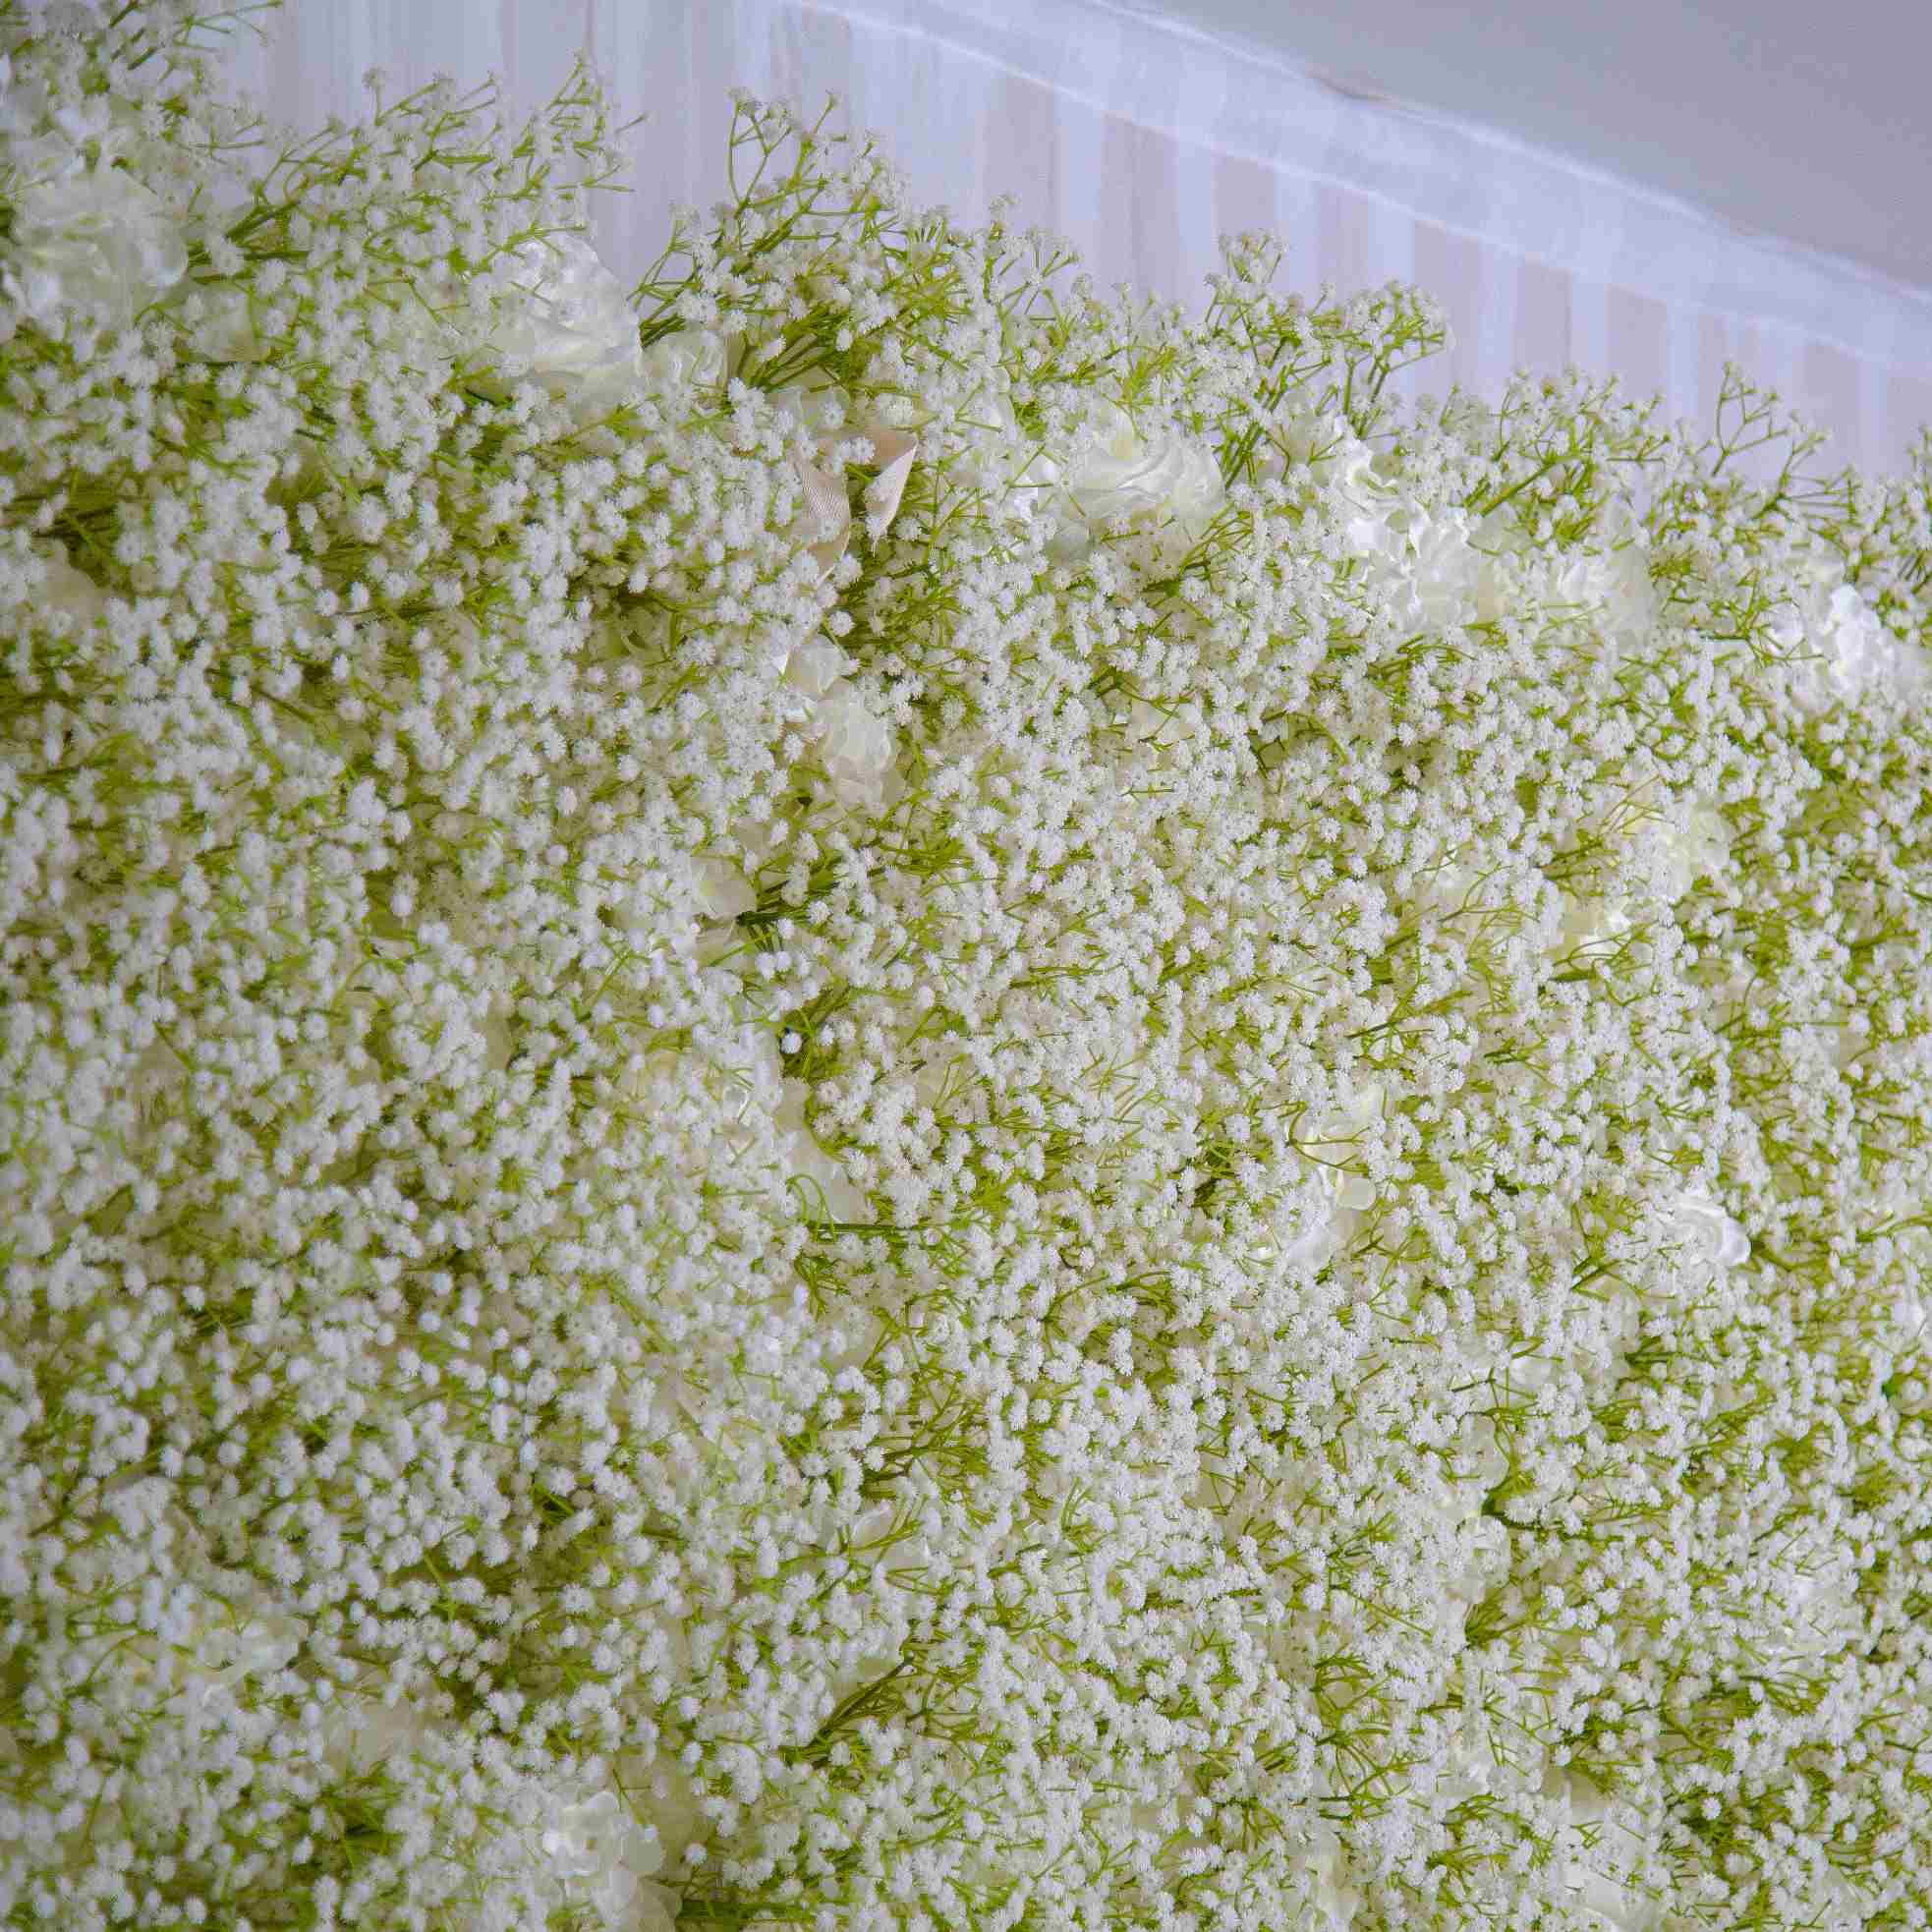 Flower Wall Baby's Breath Rolling Up Curtain Fabric Artificial Flower Wall Backdrop Proposal Wedding Party Decor